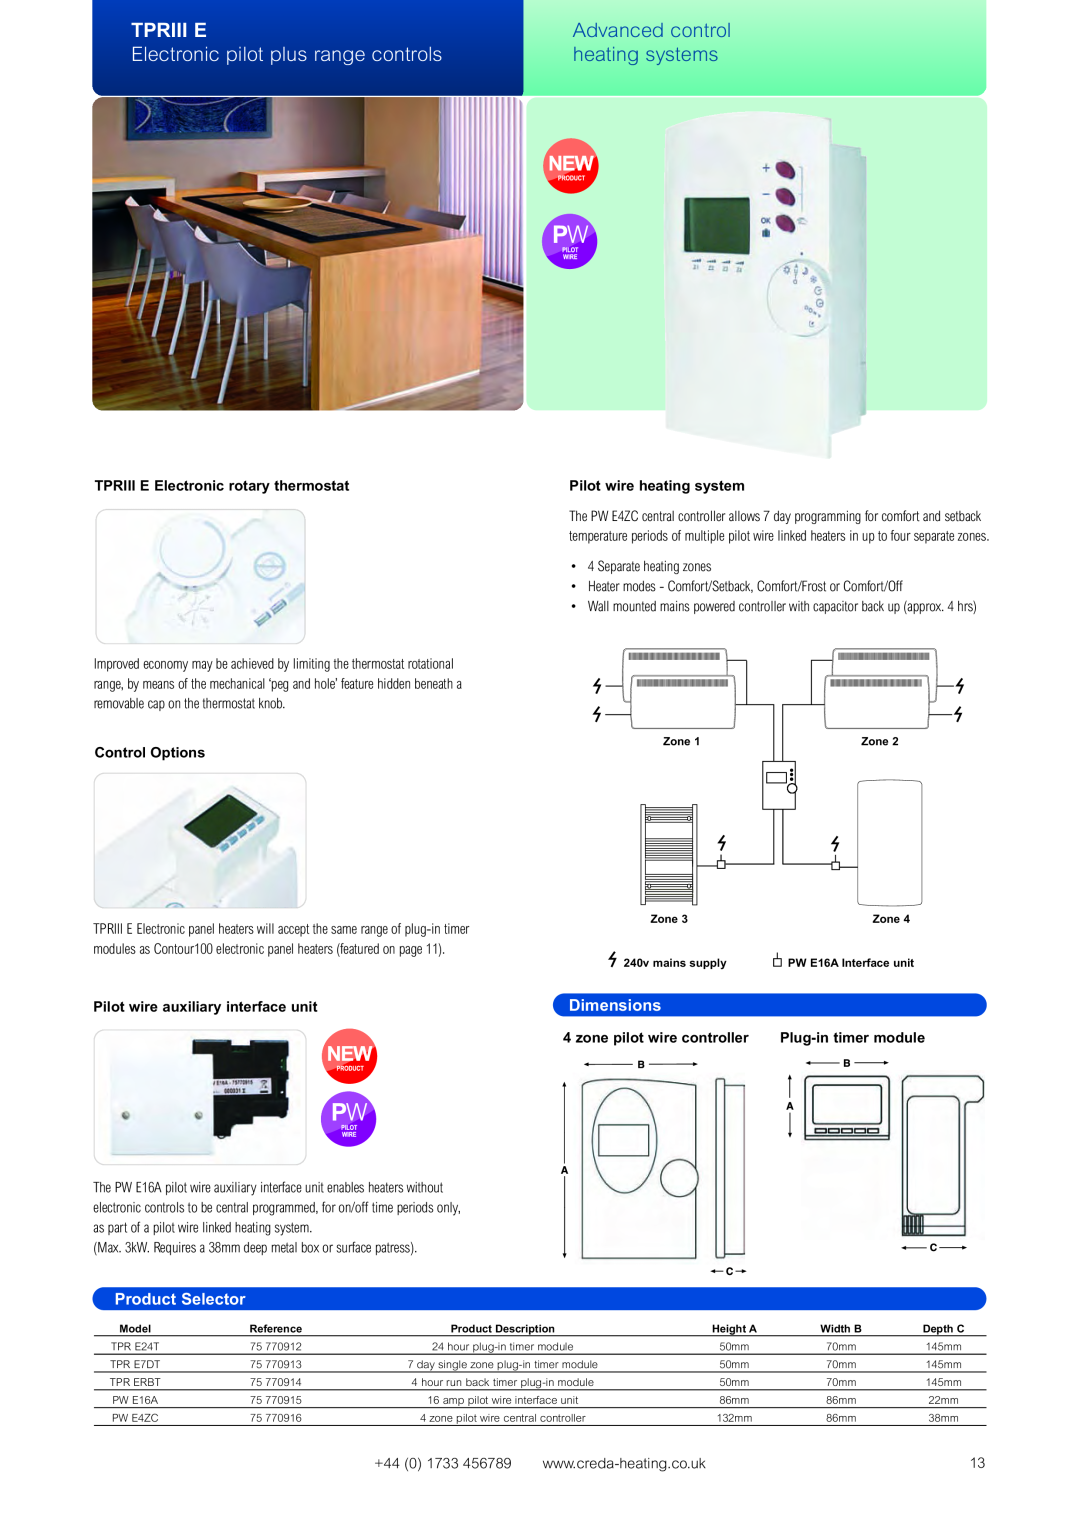 Creda Heating Solution manual Tpriii E, Advanced control, Electronic pilot plus range controls, heating systems, Dimensions 